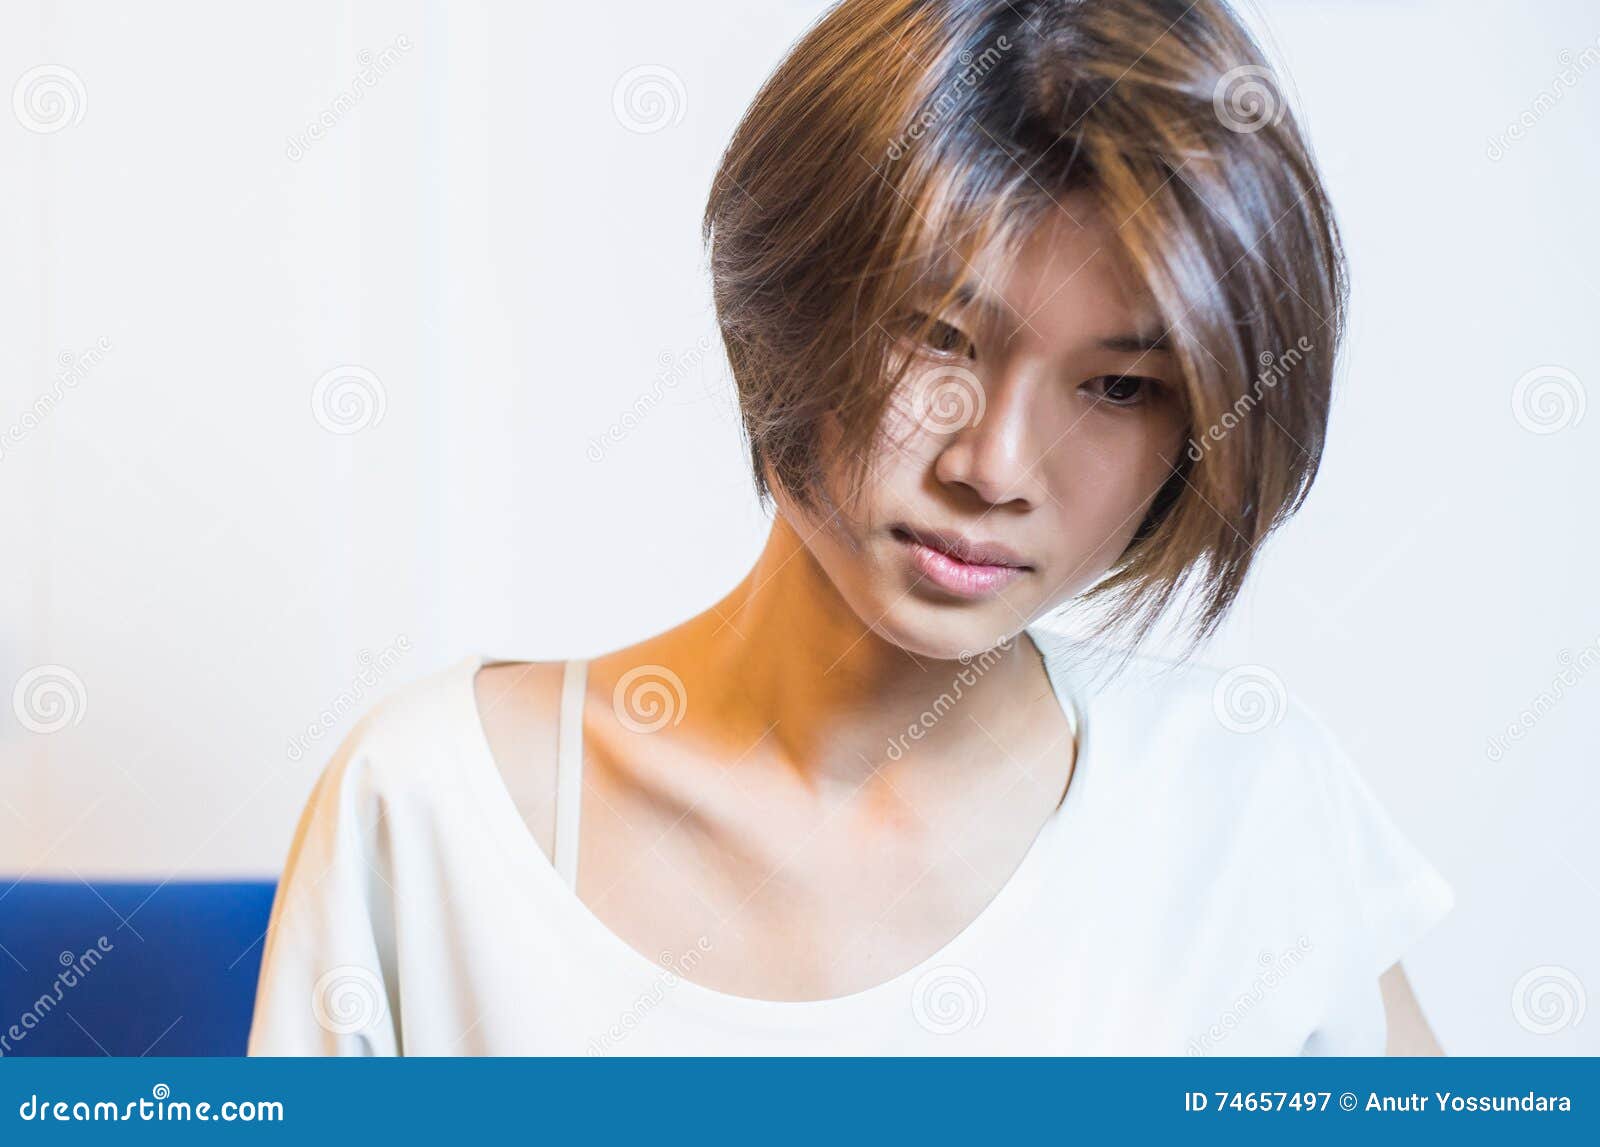 The Top 18 Short Haircuts For Asian Girls Trending in 2023